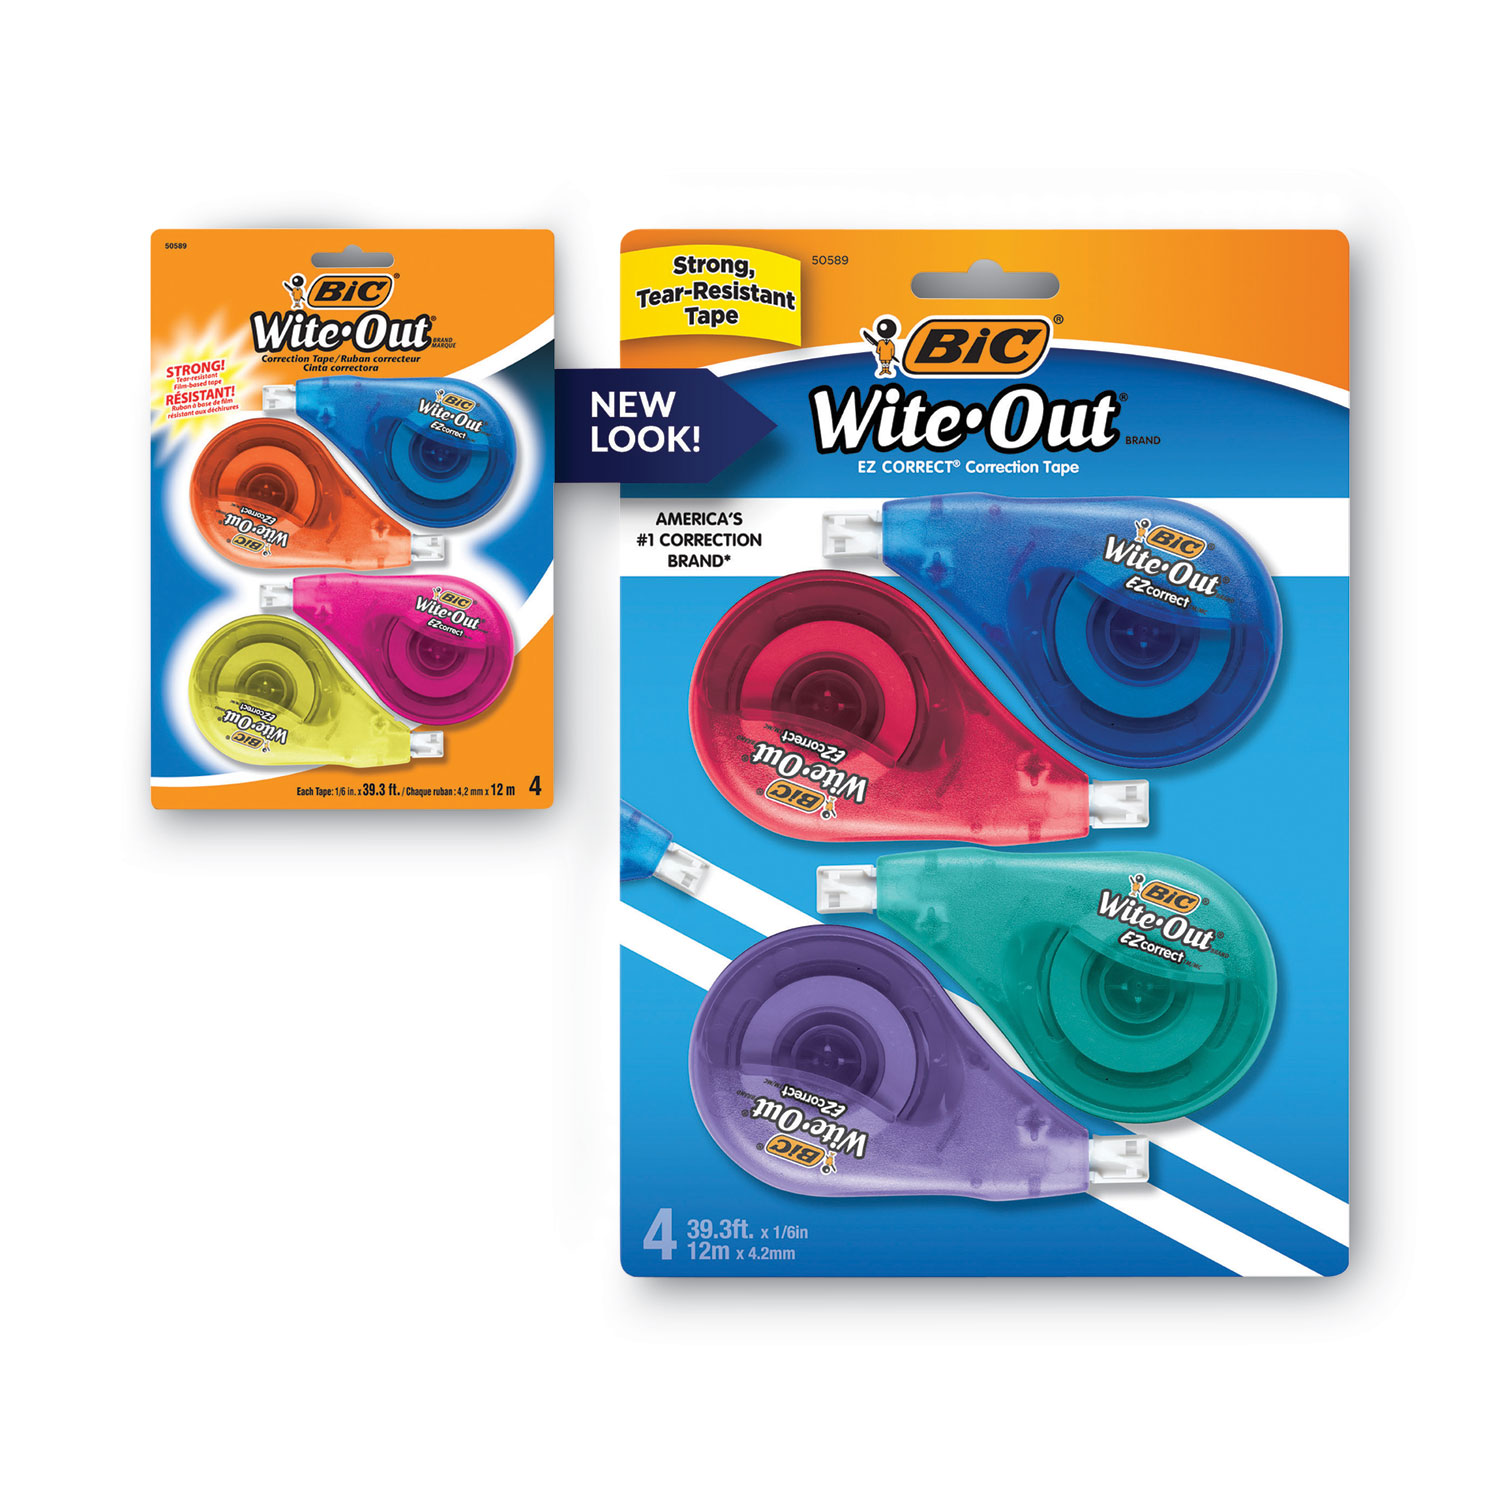 Correction Tape, Pack of 8, Cover The Error with White Tape, Applicator for Instant Corrections, Tape Eraser for Note Taking, Office Supplies